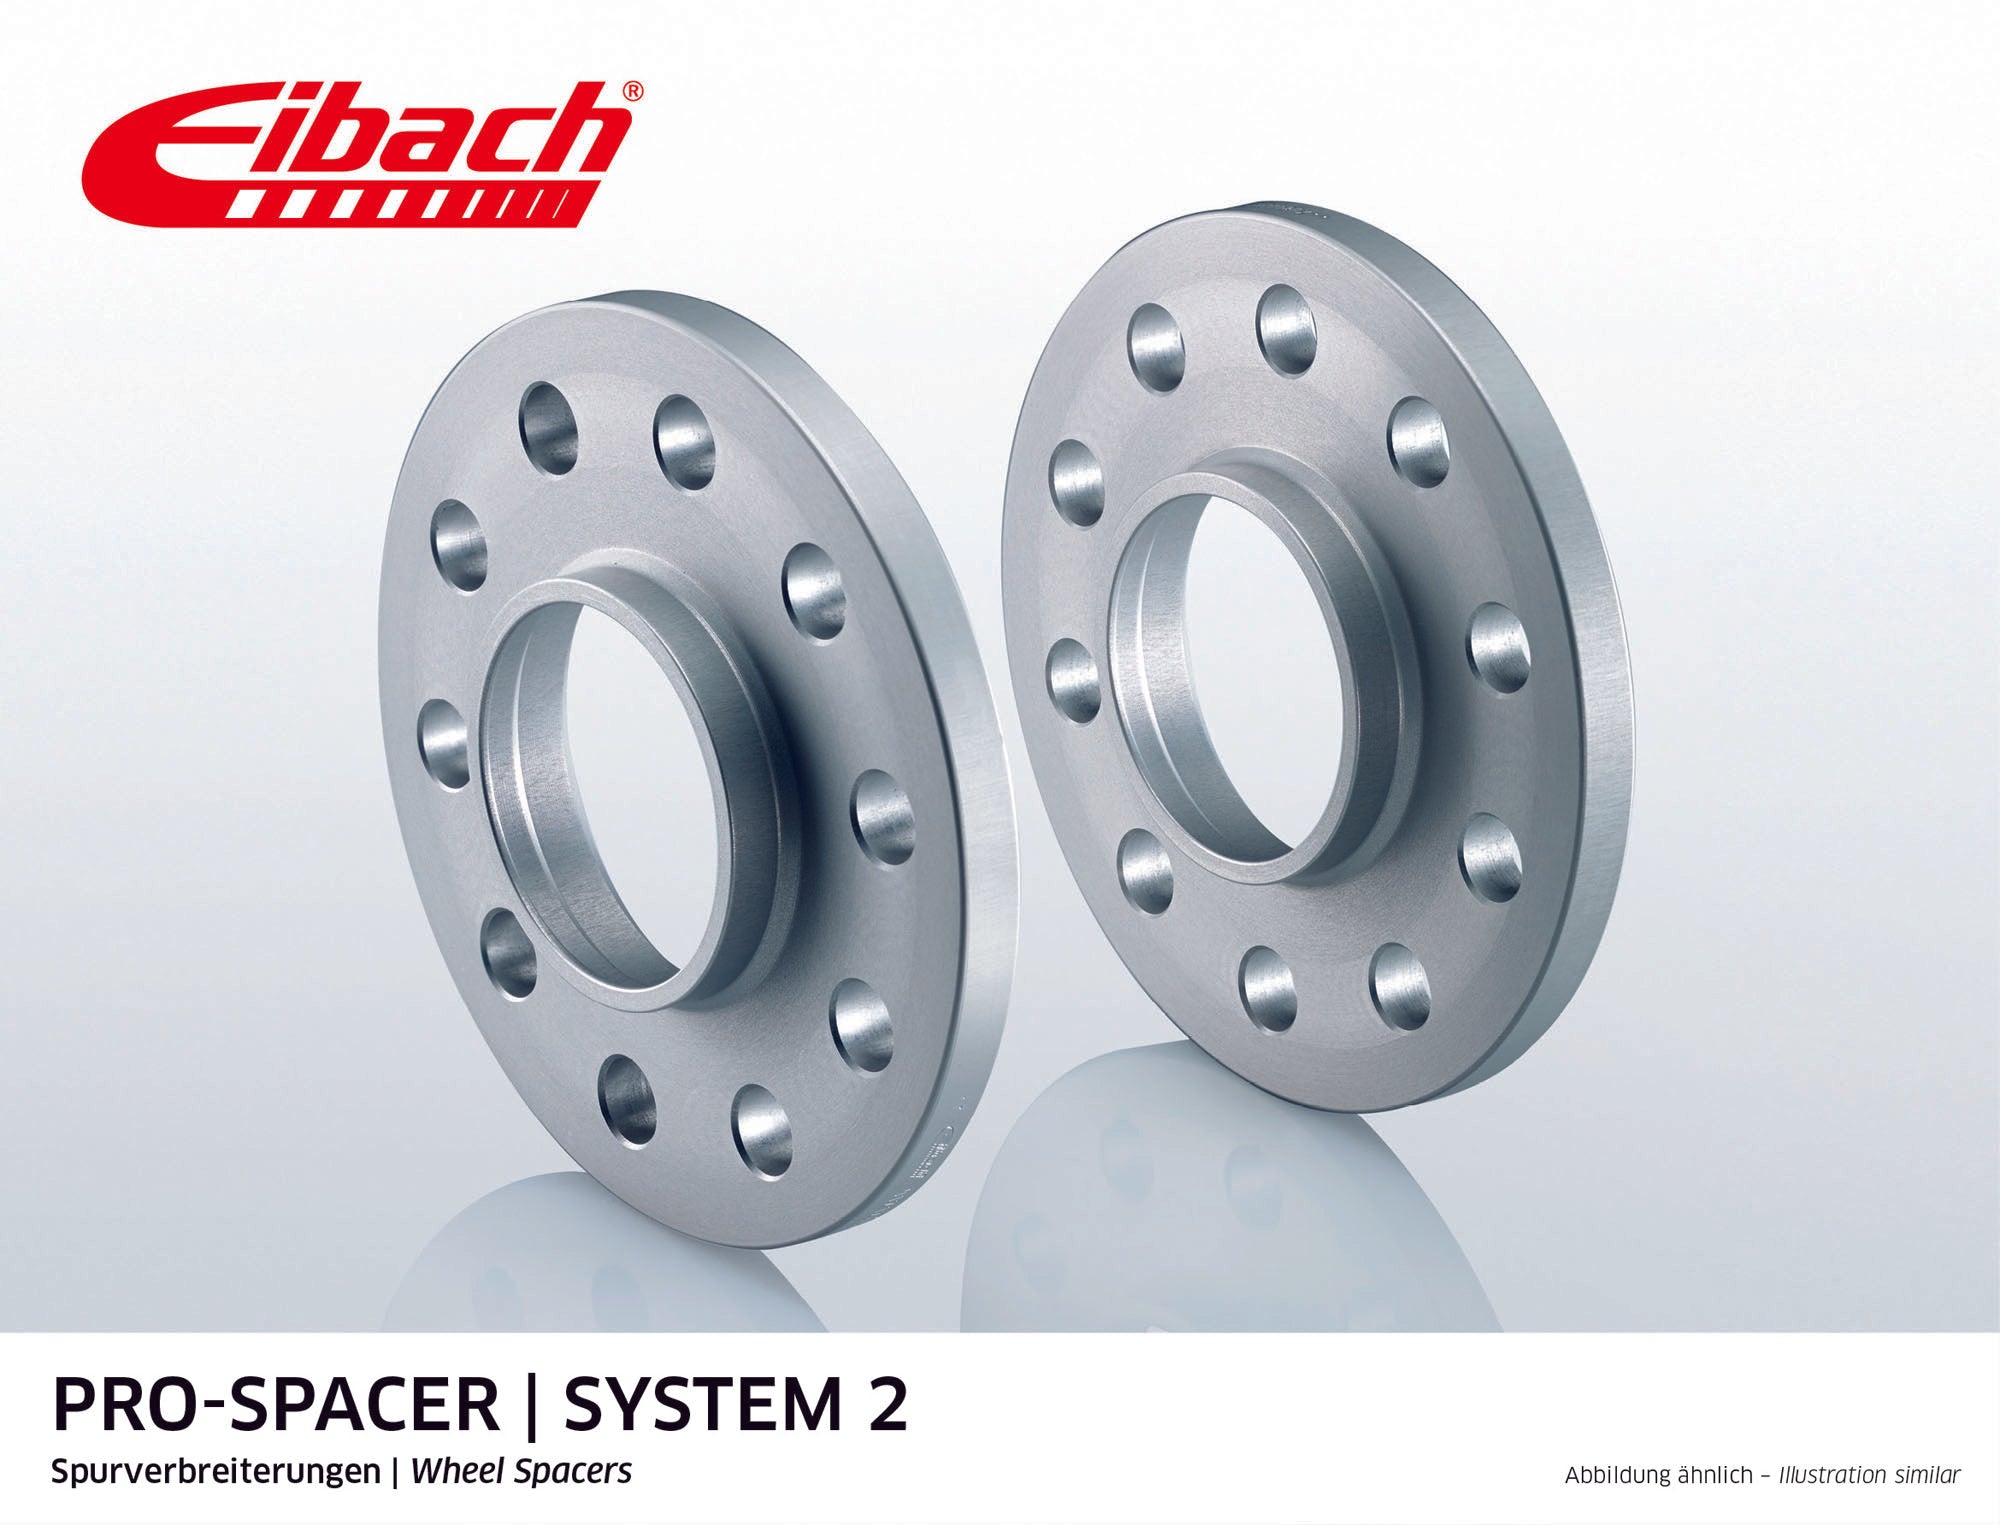 Eibach 23mm Pro-Spacer - Silver Anodized Wheel Spacer 911 2004-12 #S90-2-23-001